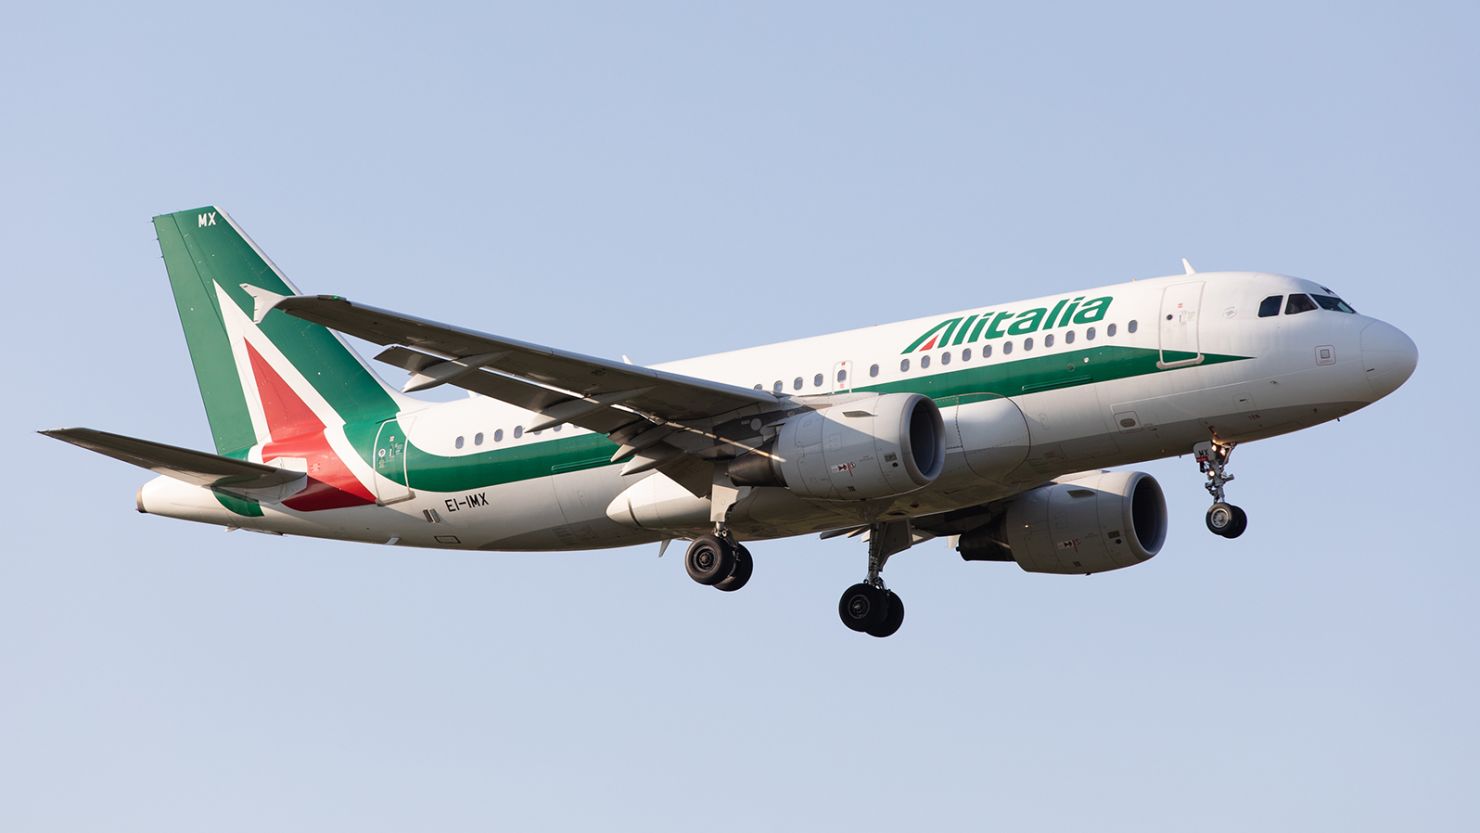 An Alitalia Airbus A319 lands at London Heathrow Airport, England on Monday 14th September 2020.  (Photo by Robert Smith/MI News/NurPhoto via Getty Images)